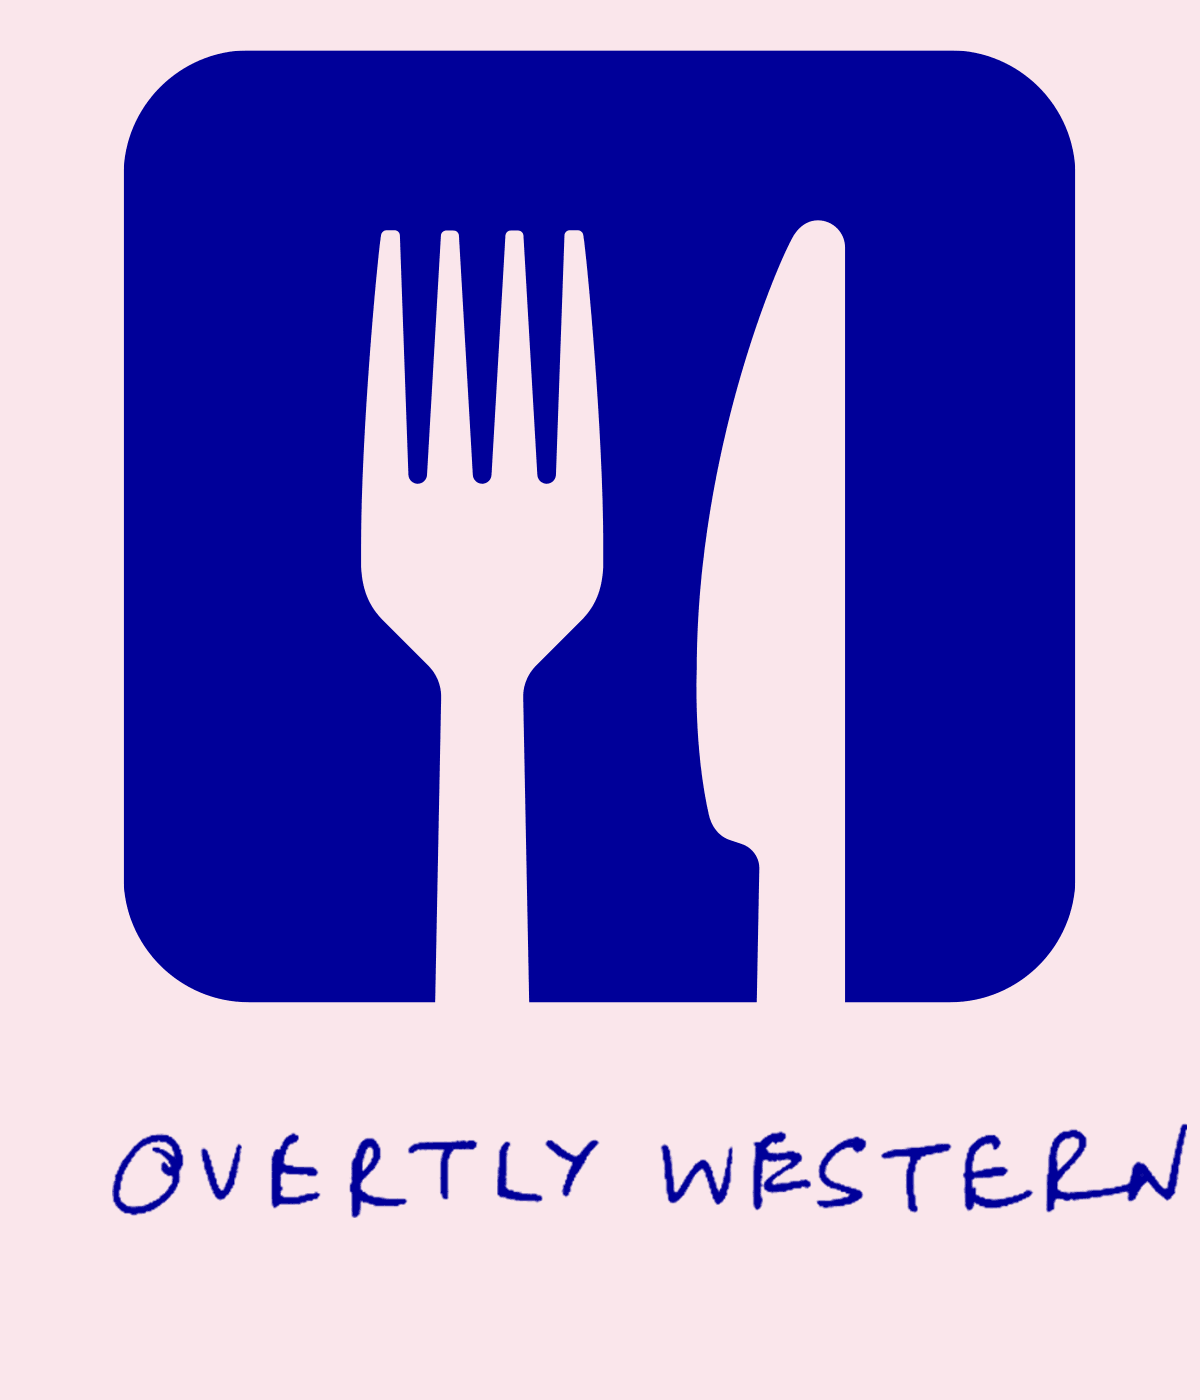 Pictogram of a knife and fork to represent food, with the text overtly western written underneath.